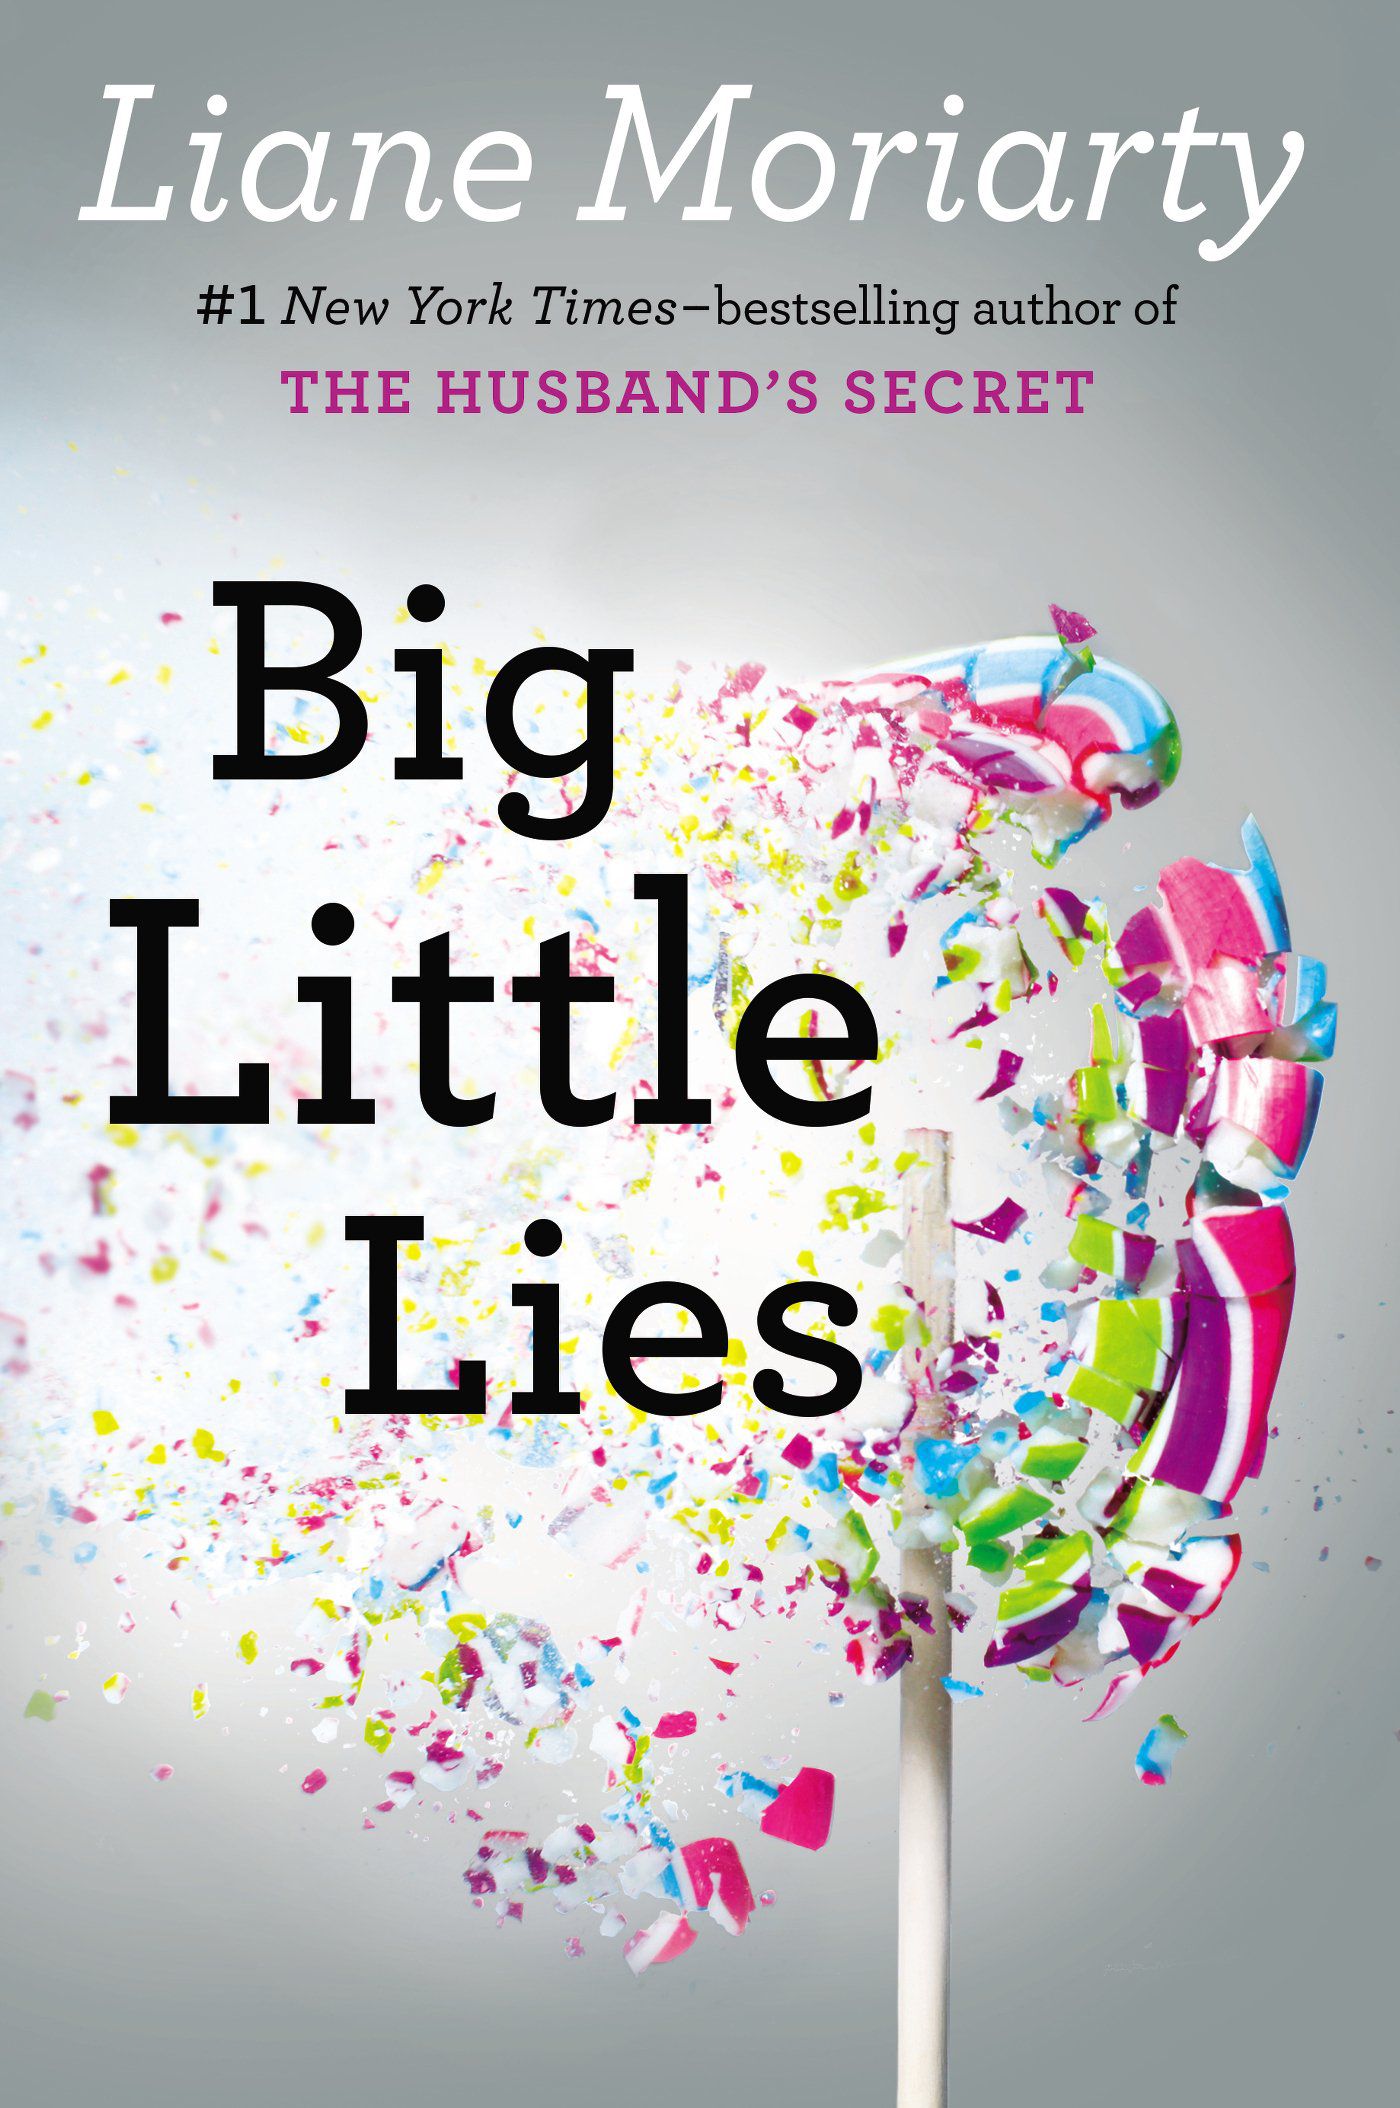 Book Club Discussions Questions for 'Big Little Lies'